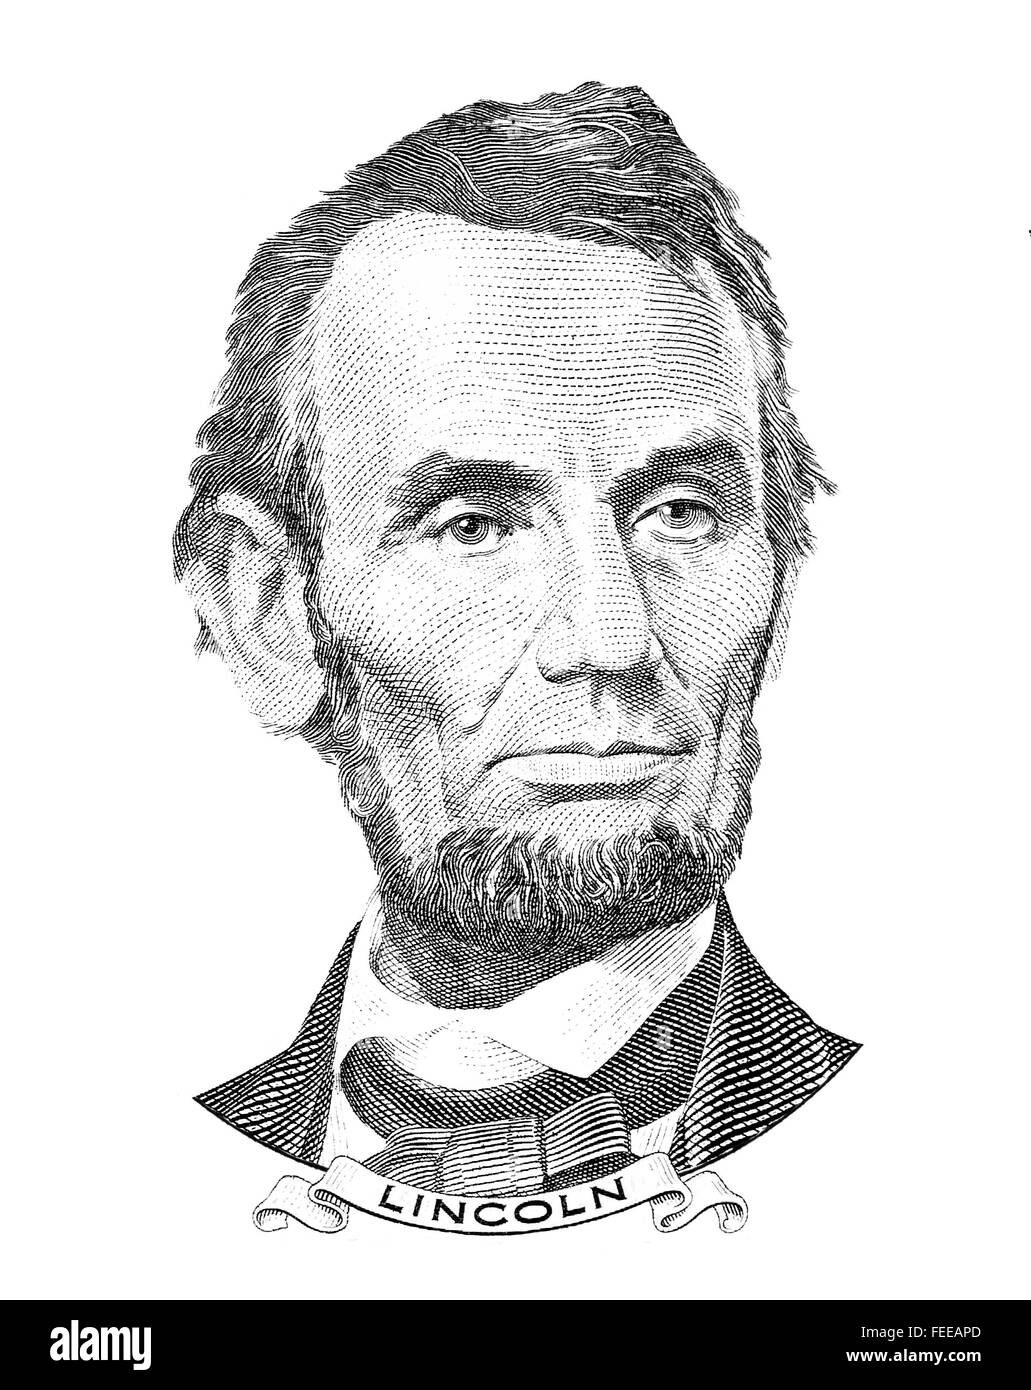 Abraham Lincoln portrait isolated on white background Stock Photo